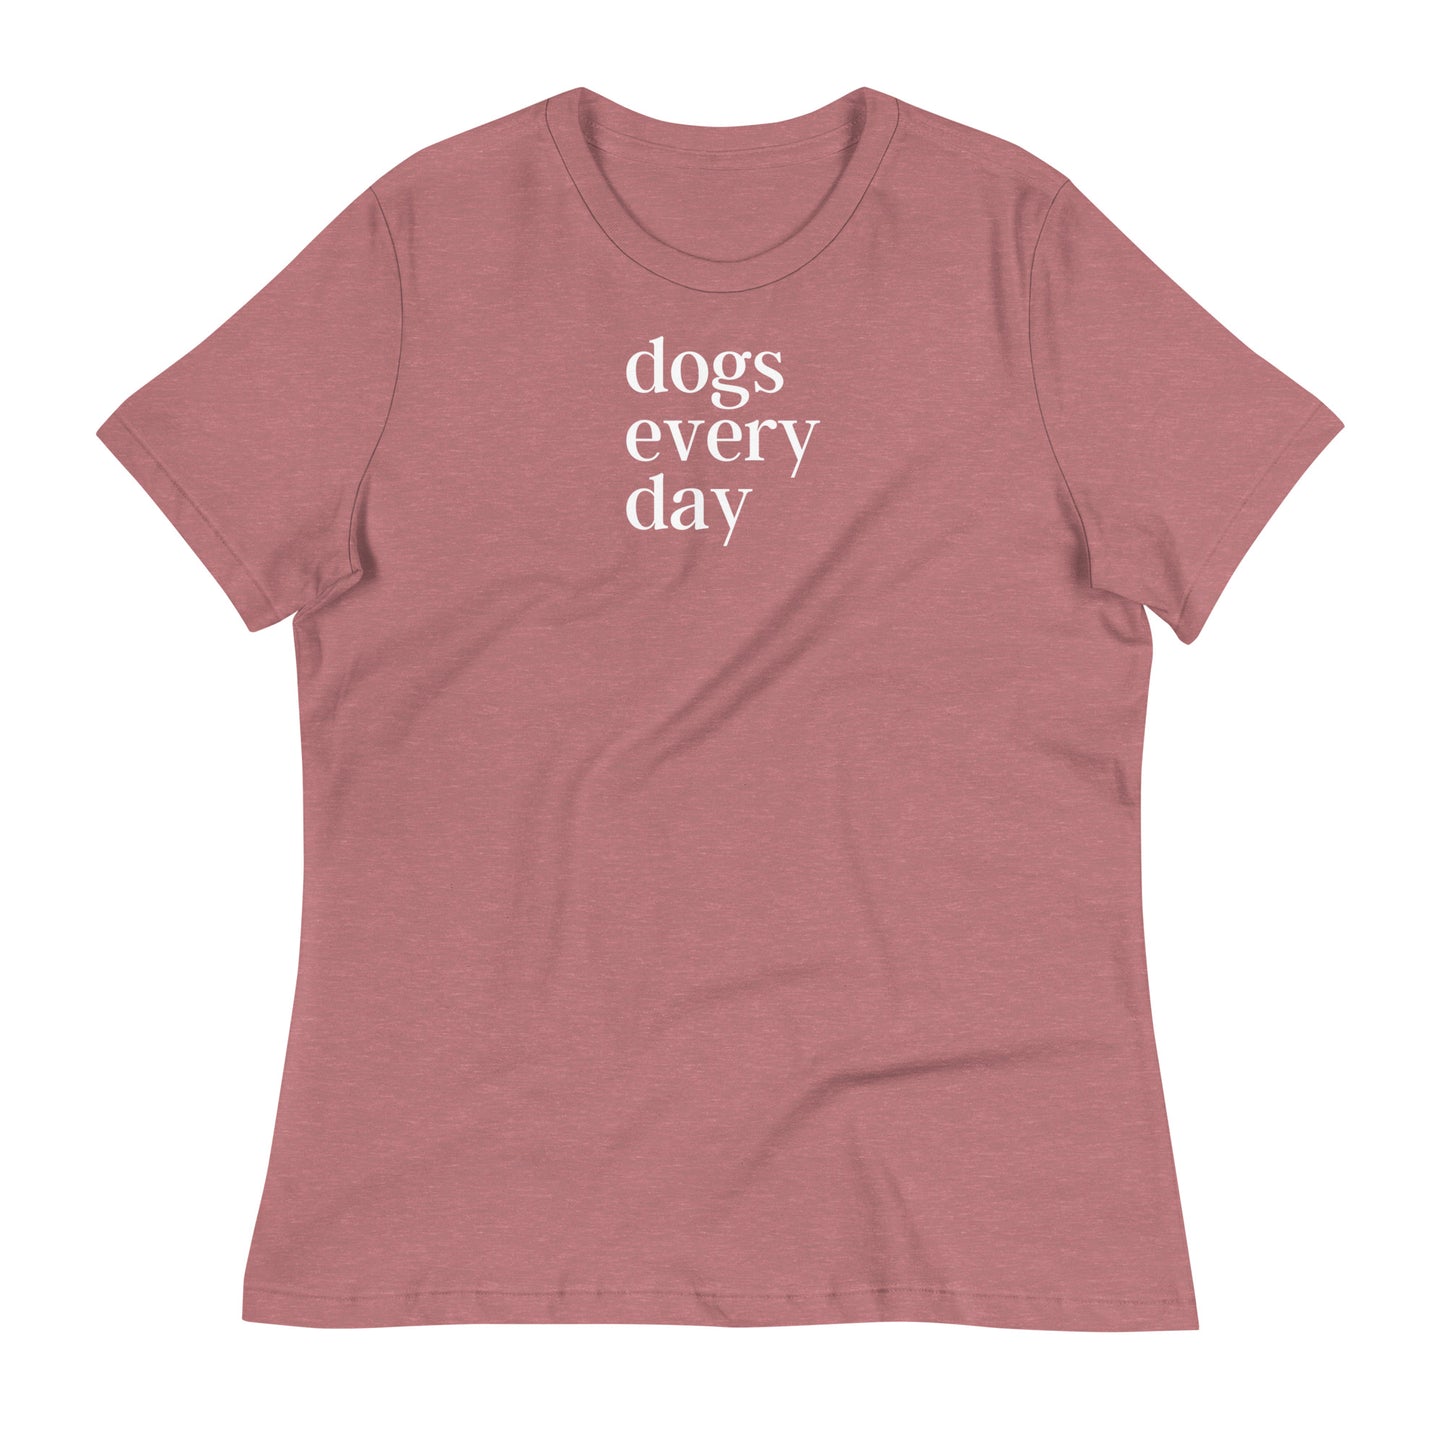 Dogs Every Day - Dog Lovers Women's Relaxed T-Shirt